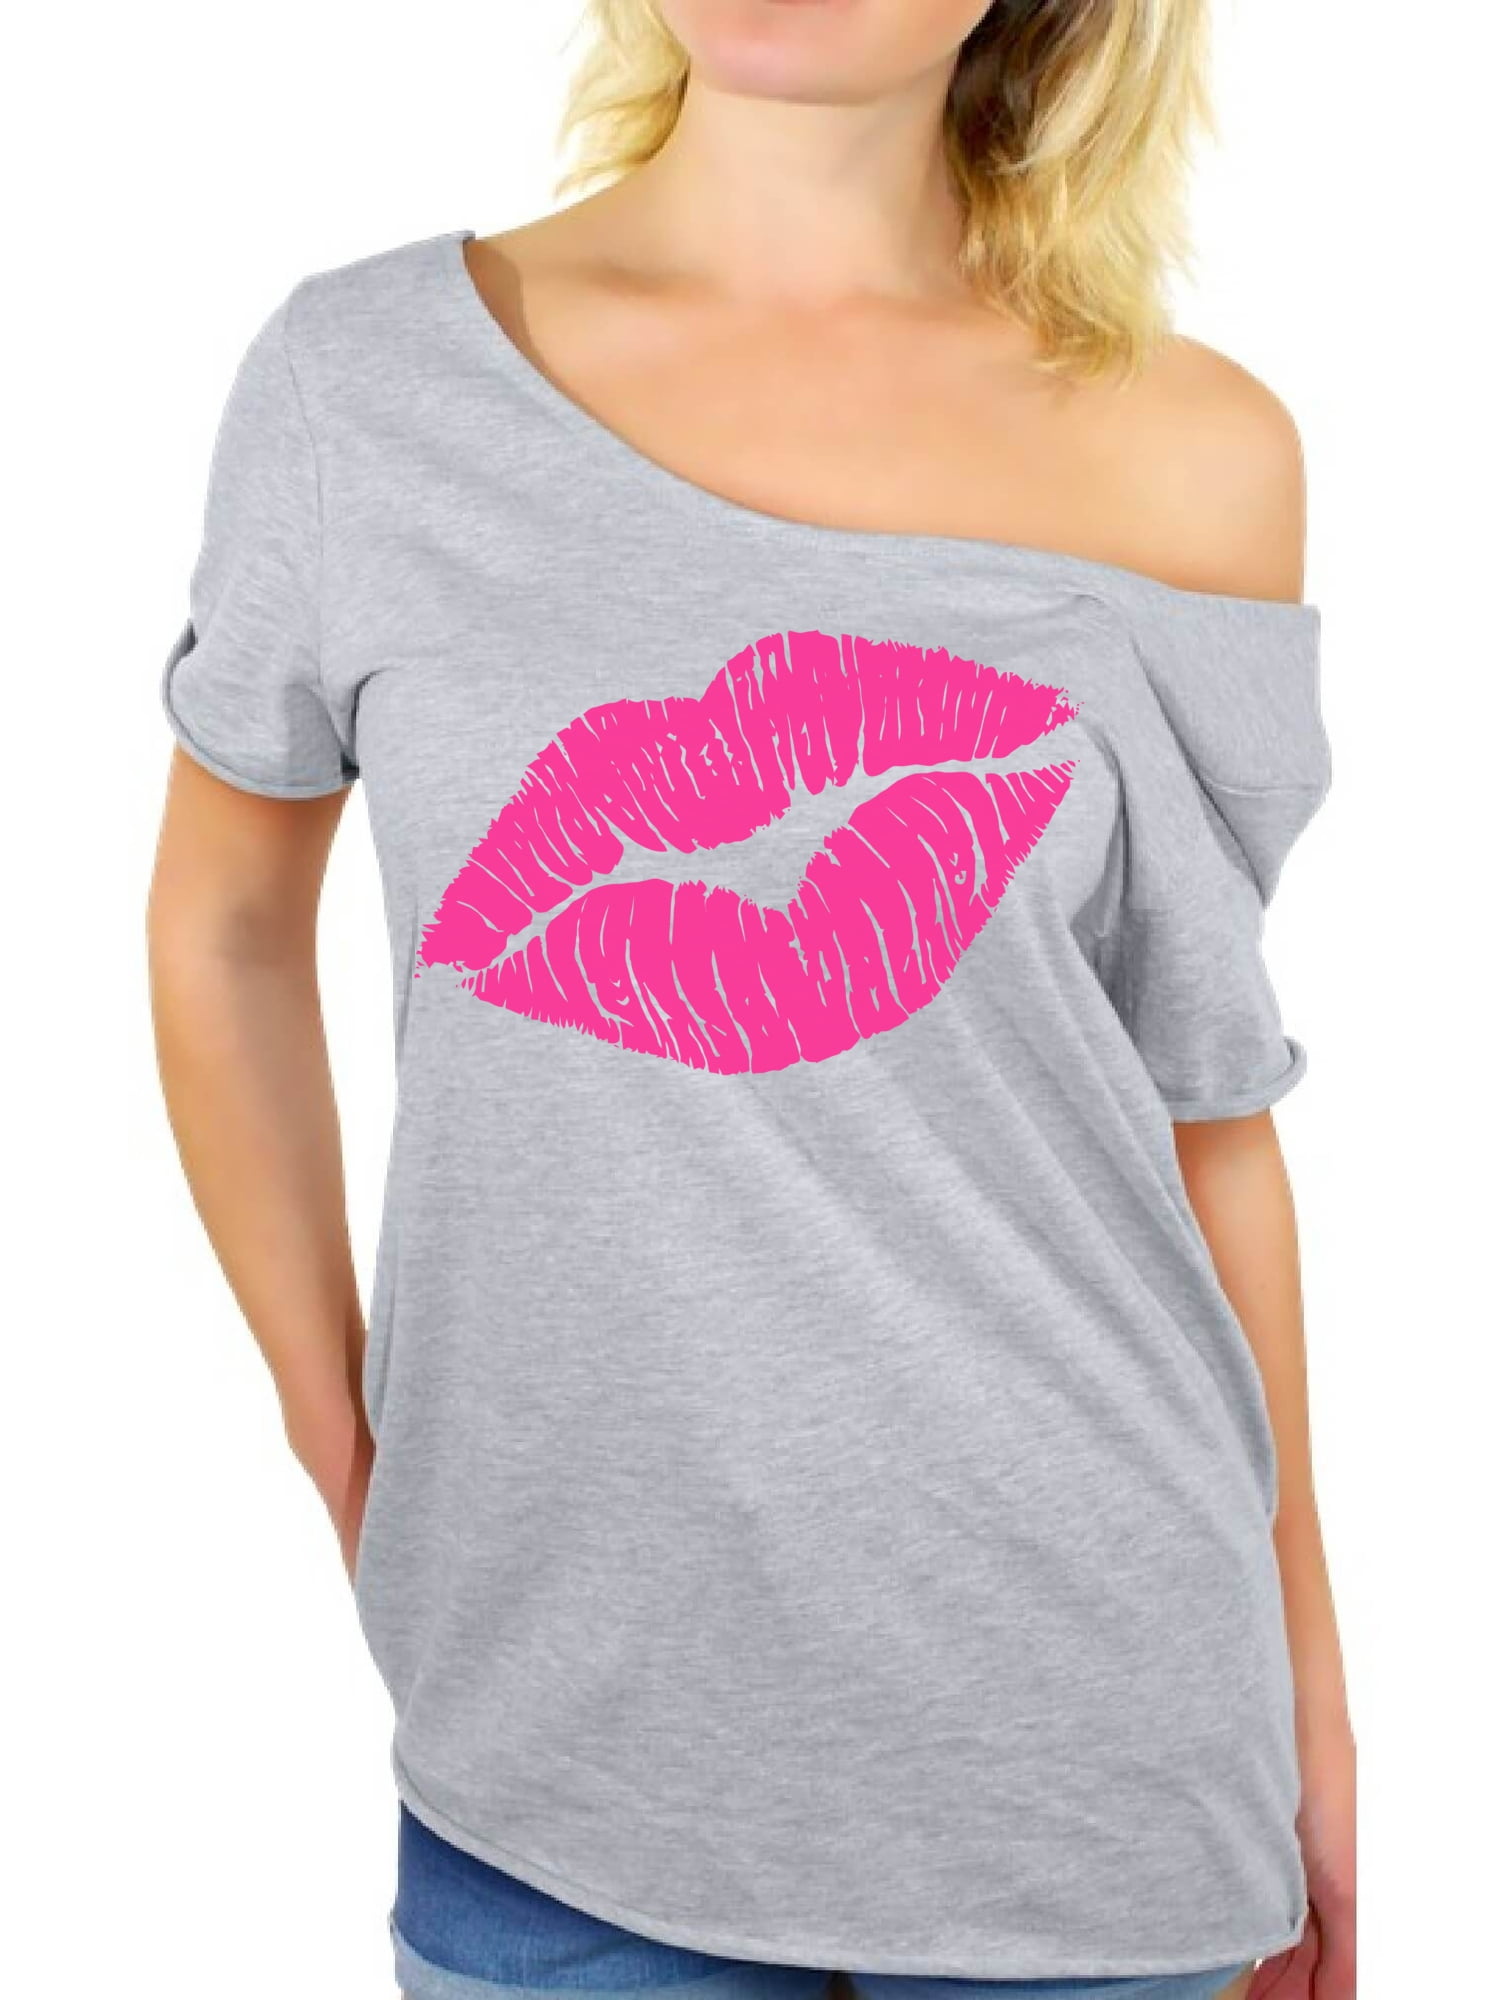 Awkward Styles Pink Lips Shirt Retro 80s Neon Lips T Shirt 80s Shirt Off  the Shoulder 80s Accessories 80s Rock T Shirt 80s T Shirt 80s Costume 80s  Clothes for Women 80s